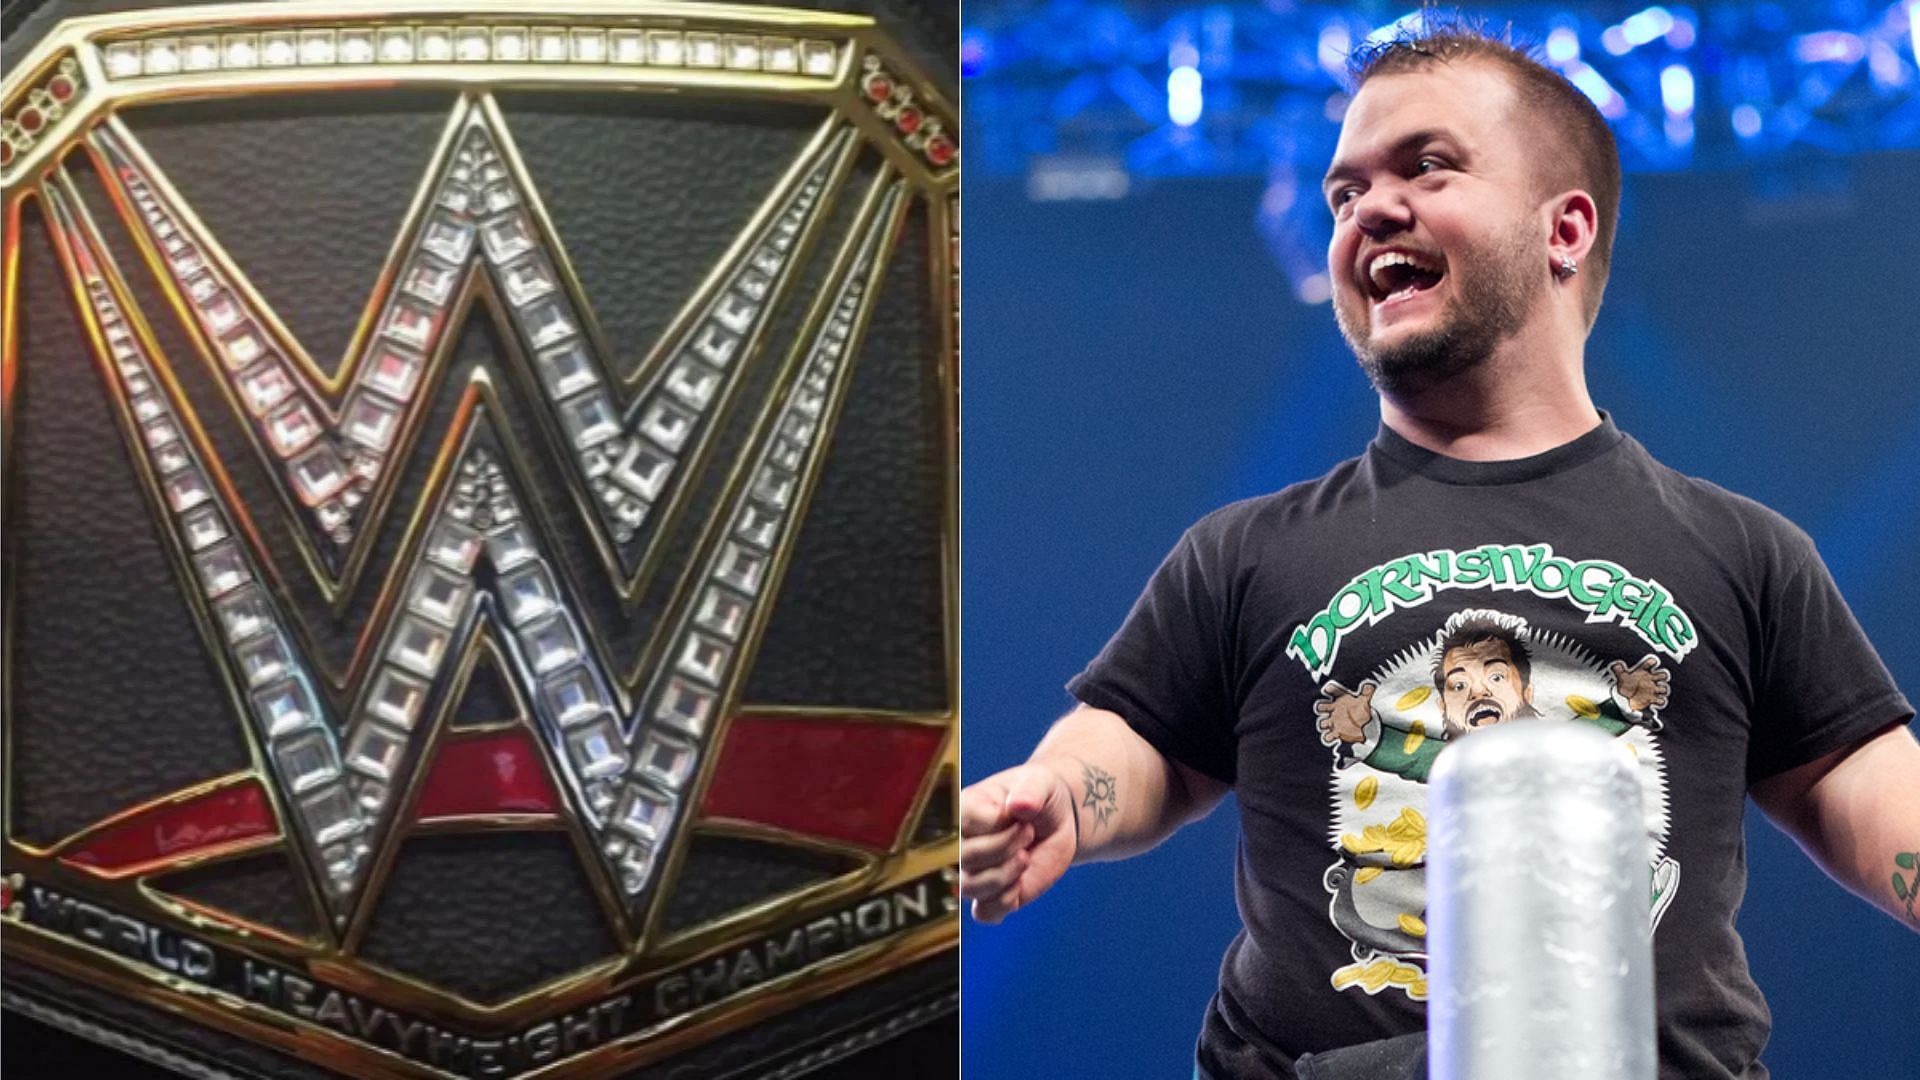 Hornswoggle featured in several memorable storylines